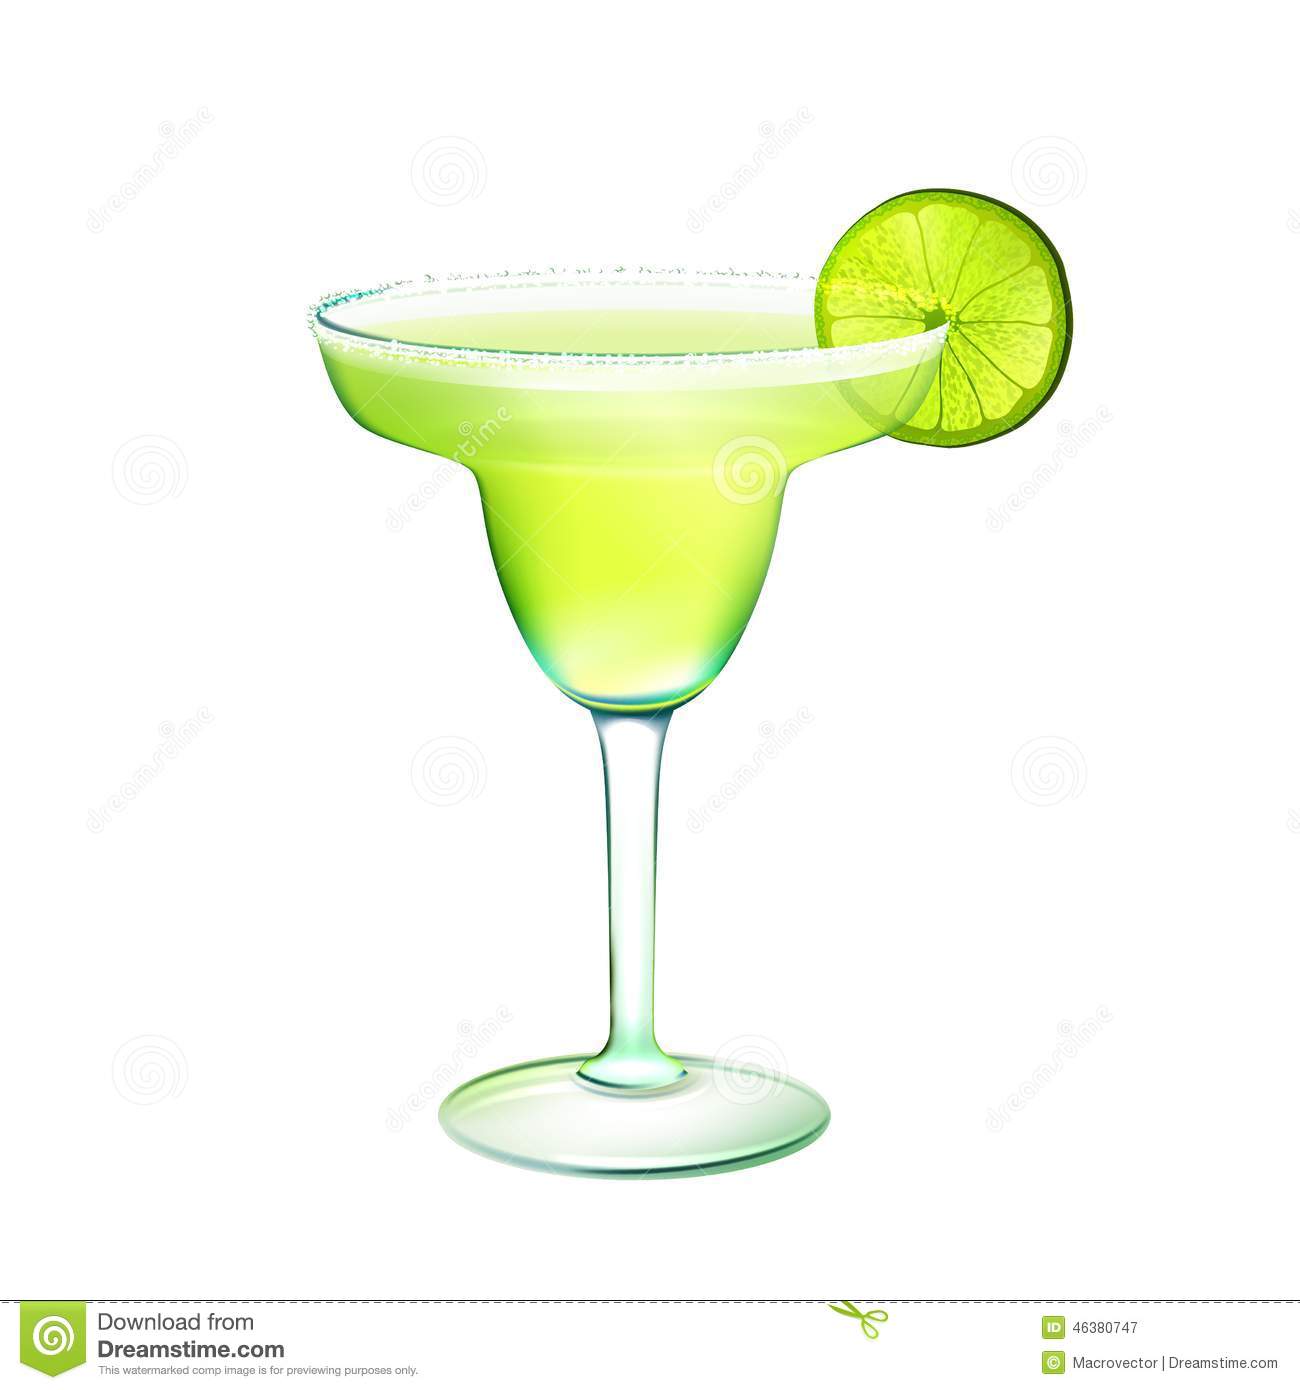 Margarita Realistic Cocktail In Glass With Lime Slice Isolated On